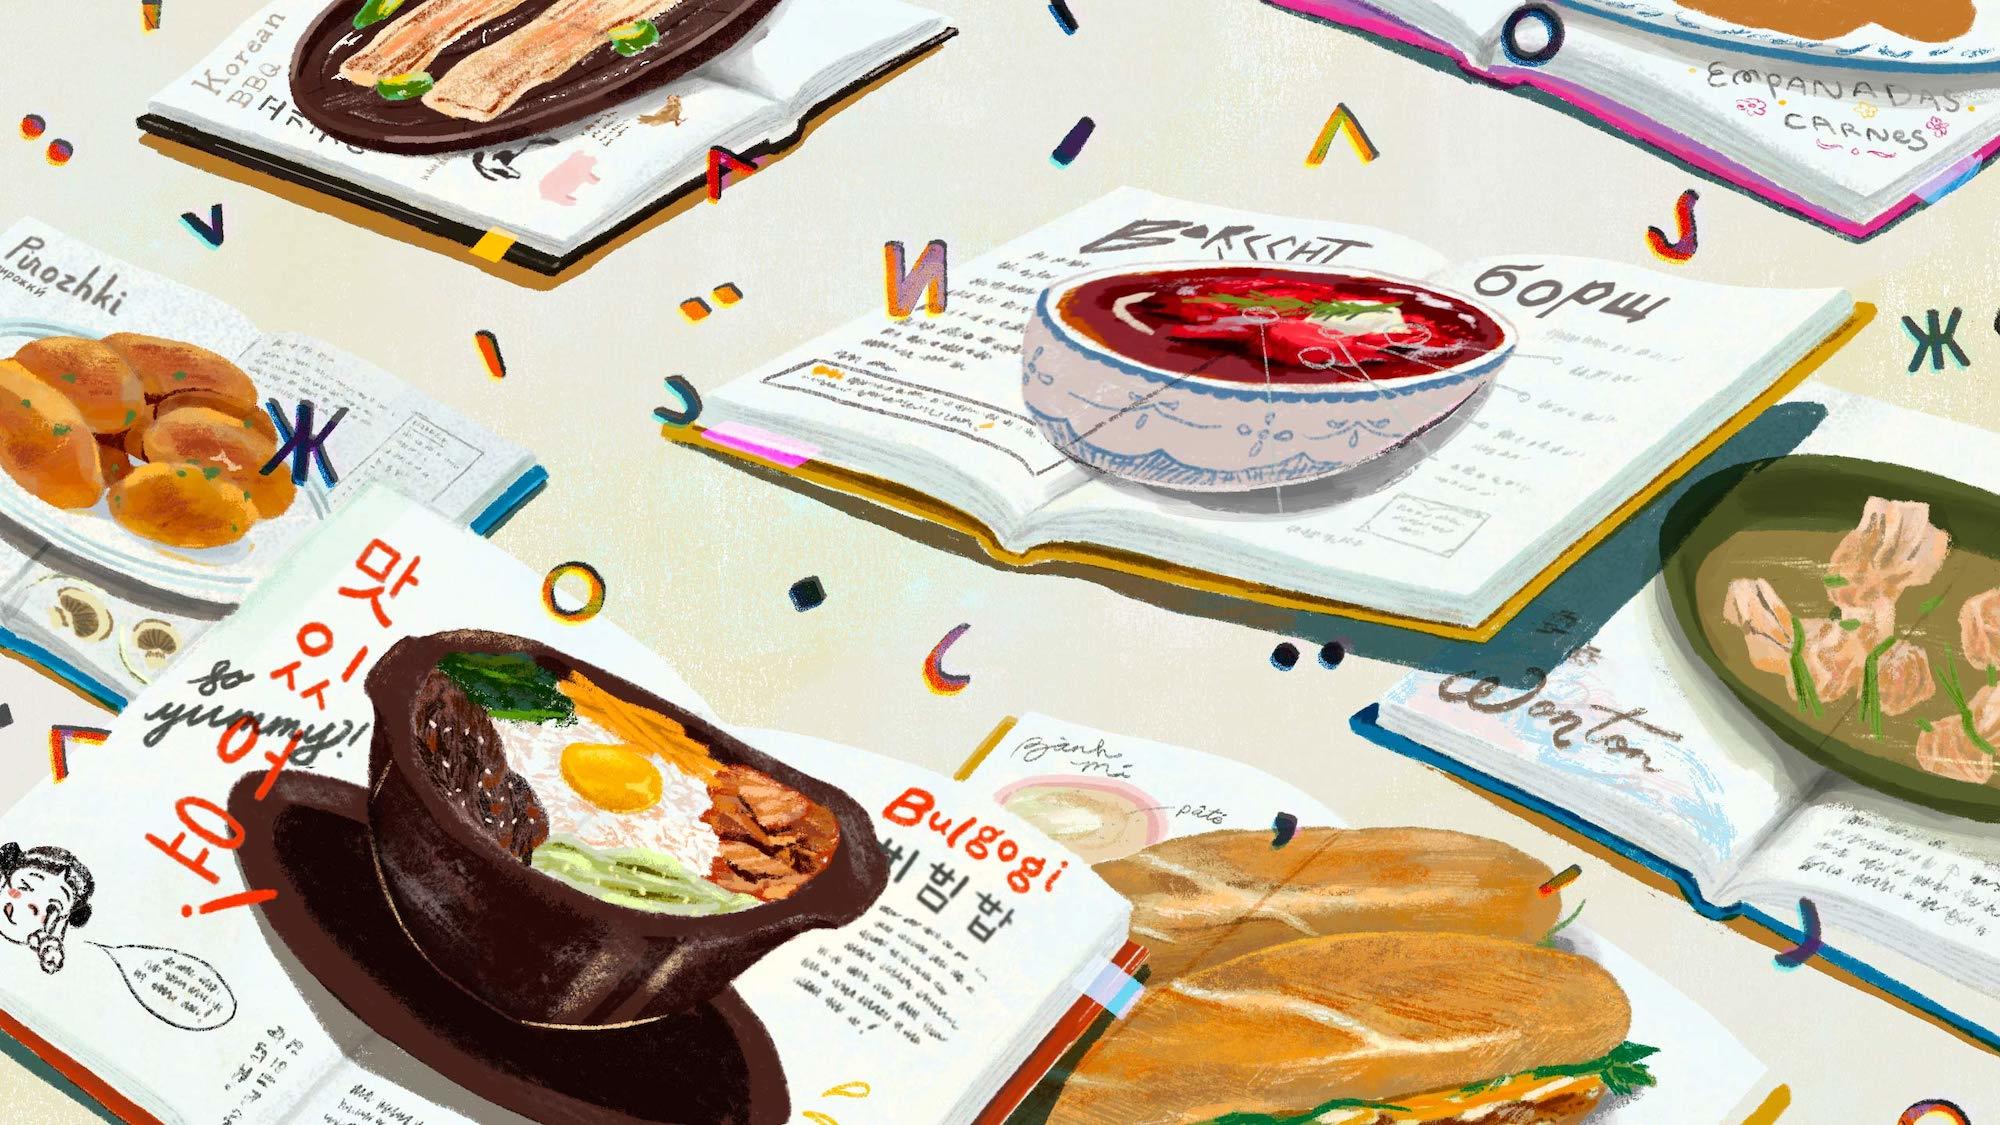 An illustration of various cookbooks with international diacritics, recipes, and dishes. September 2021